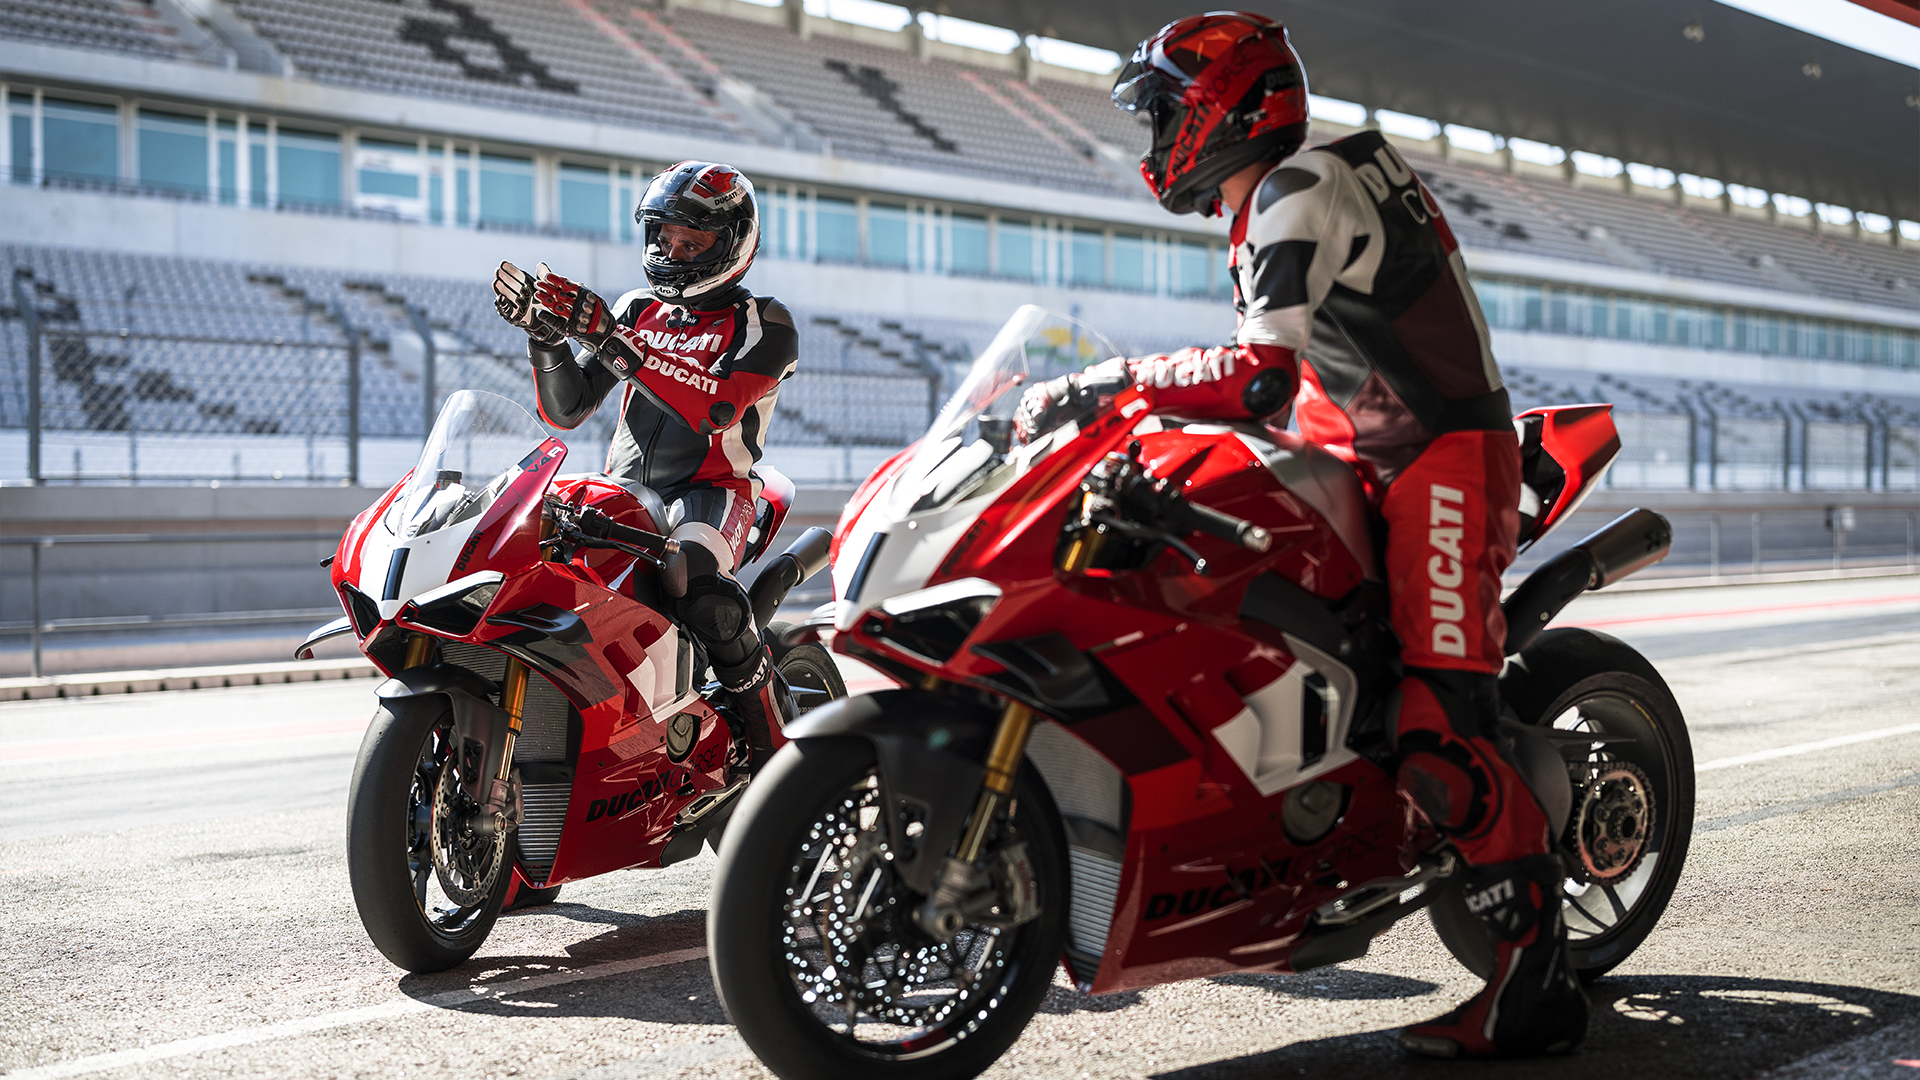 Ducati-Panigale-V4R-MY23-performance-gallery-01-1920x1080